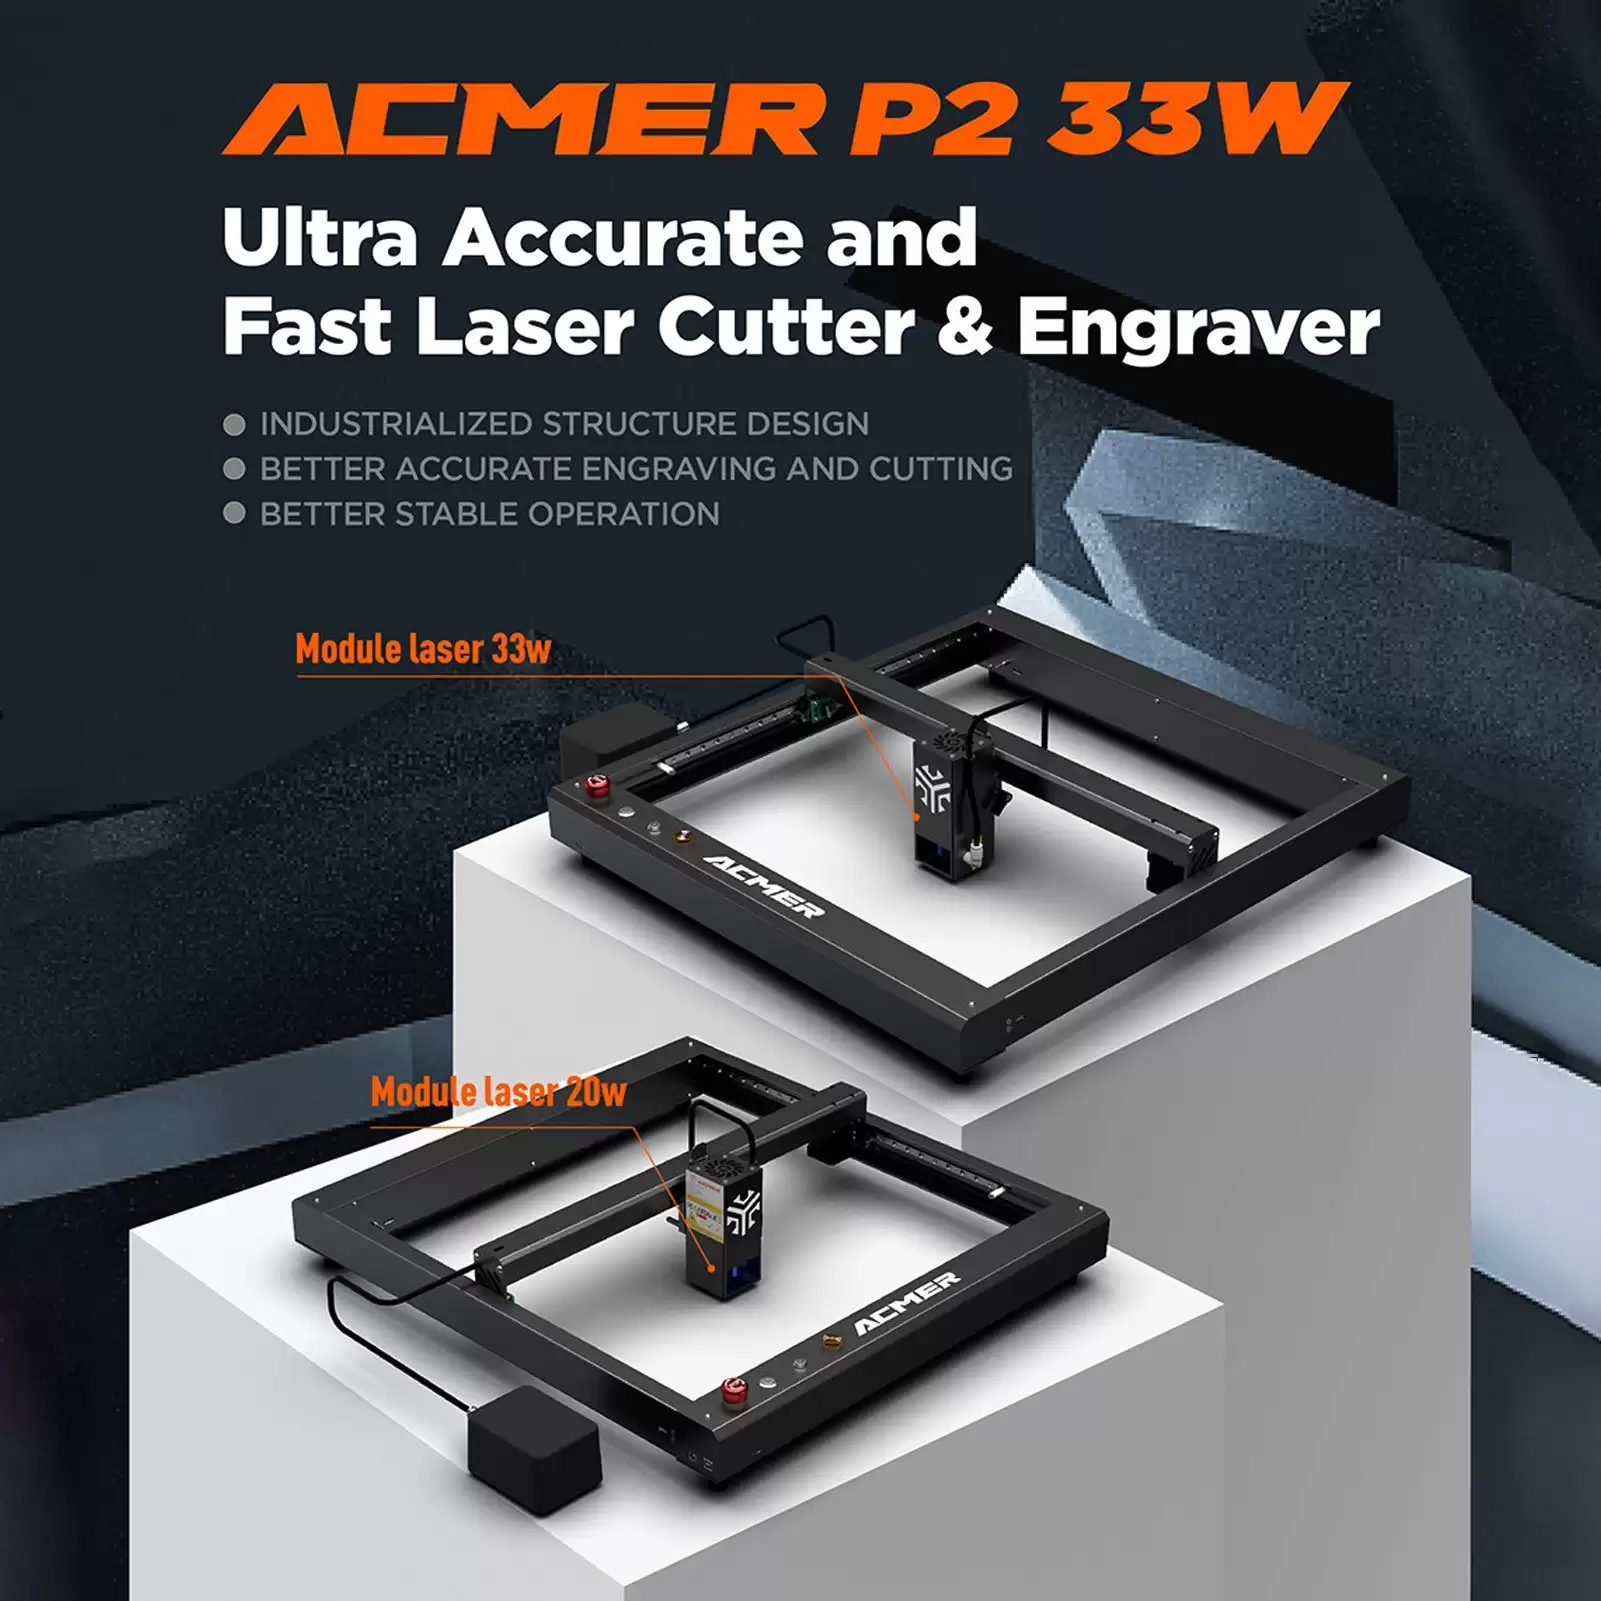 Spend $869.99 Acmer P2 33w Laser Engraver With Automatic Air-Assist System With This Cafago Discount Voucher